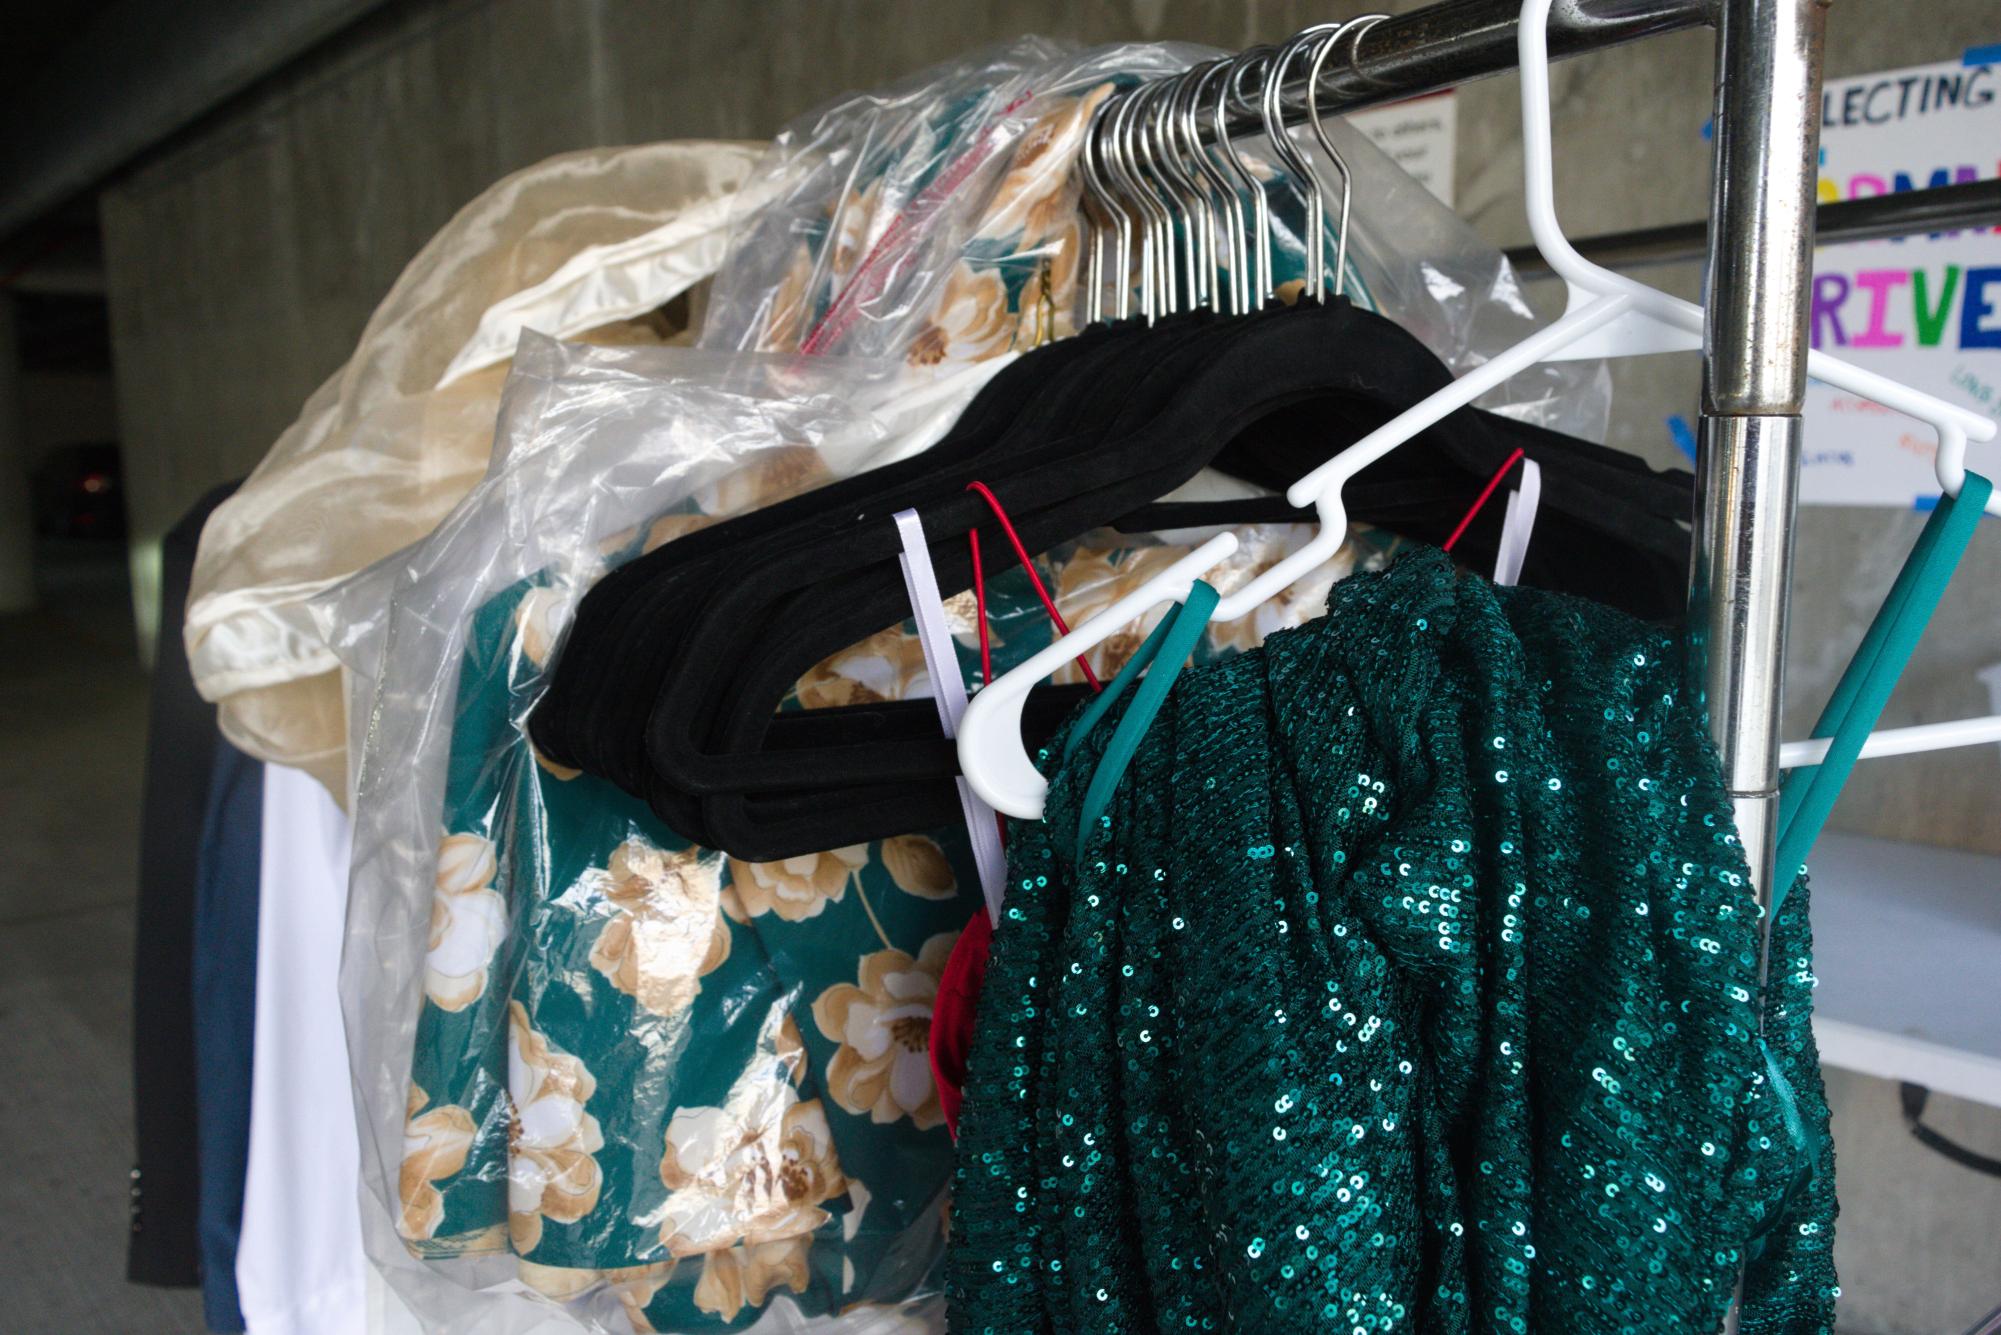 From February 12-16th, students donated gently-used formal dresses, suits, accessories, and shoes to the Prom Princess Project. The clothing items will go to teens struggling with poverty around San Diego